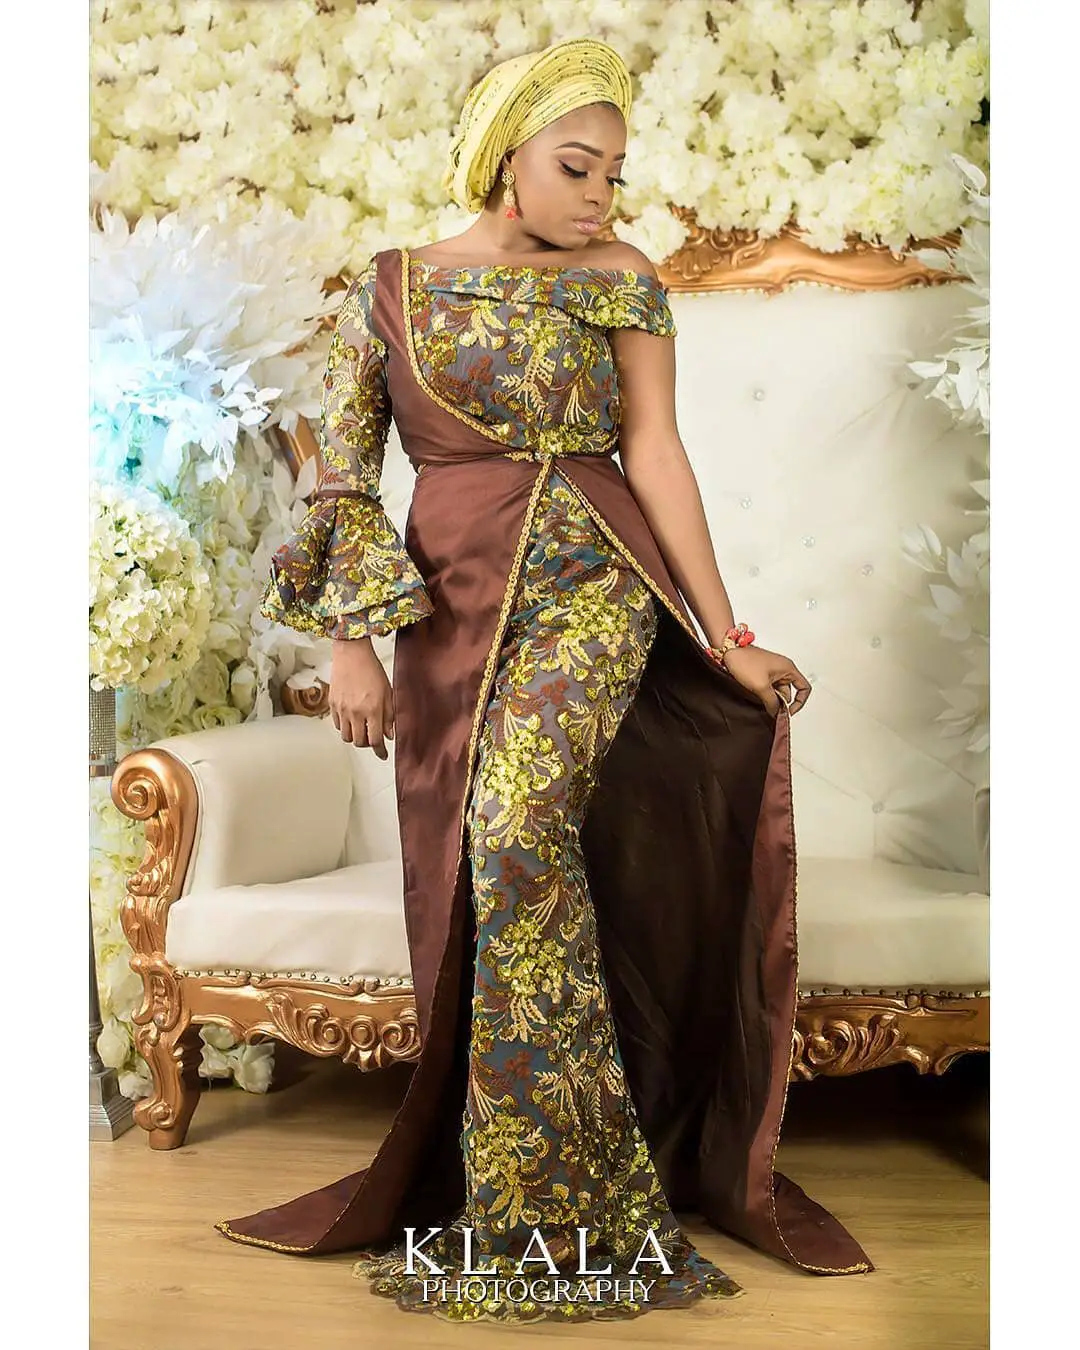 Fantastic Lace Asoebi Outfits That Will Brighten Your Day!